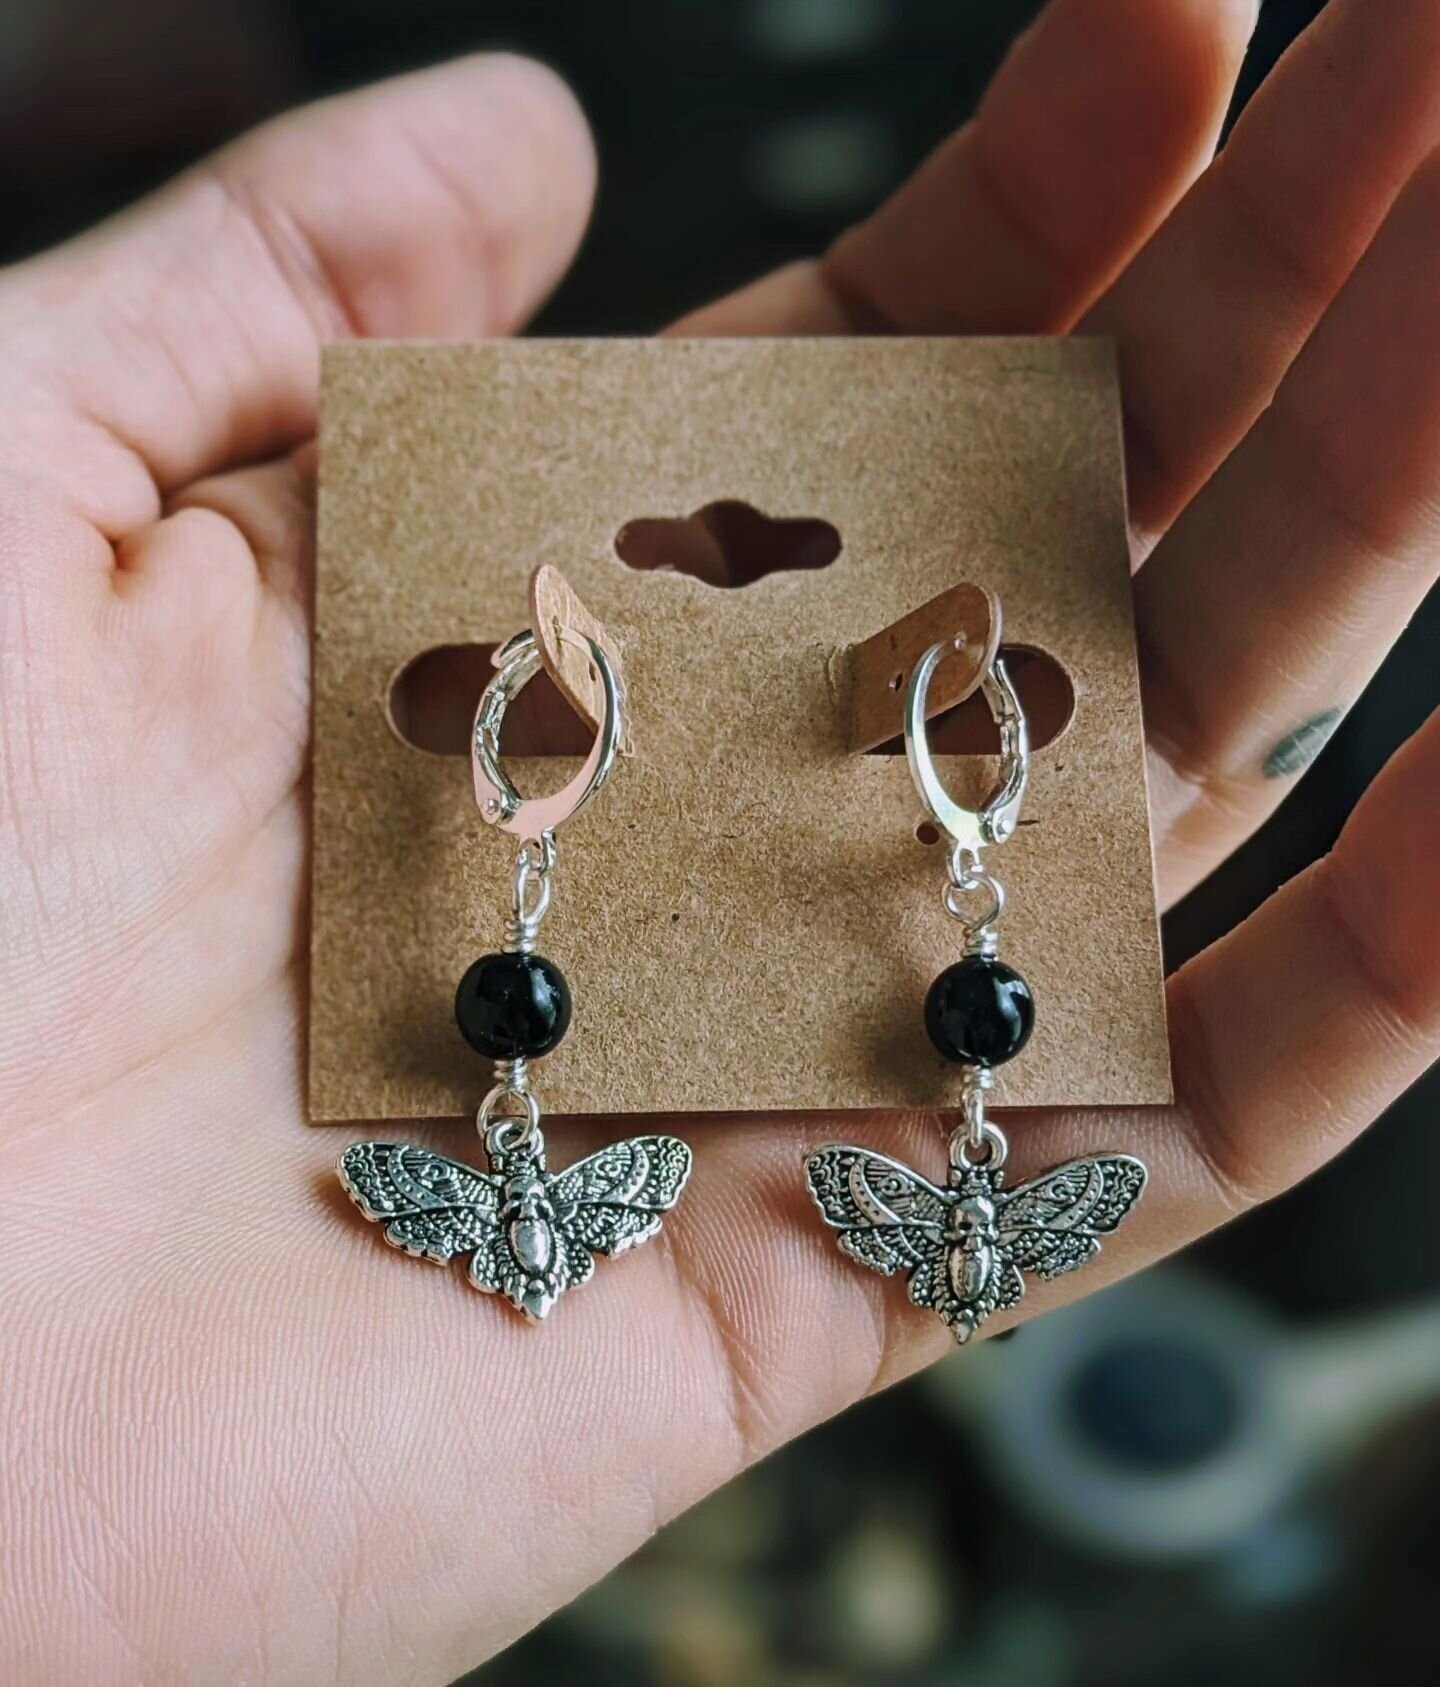 In honor of my 30th birthday TOMORROW, August 4th, I'll be releasing a few macabre-themed jewelry pieces to celebrate the &quot;Death of My 20s&quot;, like these stainless steel and Black Onyx Death Head Moth earrings! Tune in tomorrow at Noon EST to